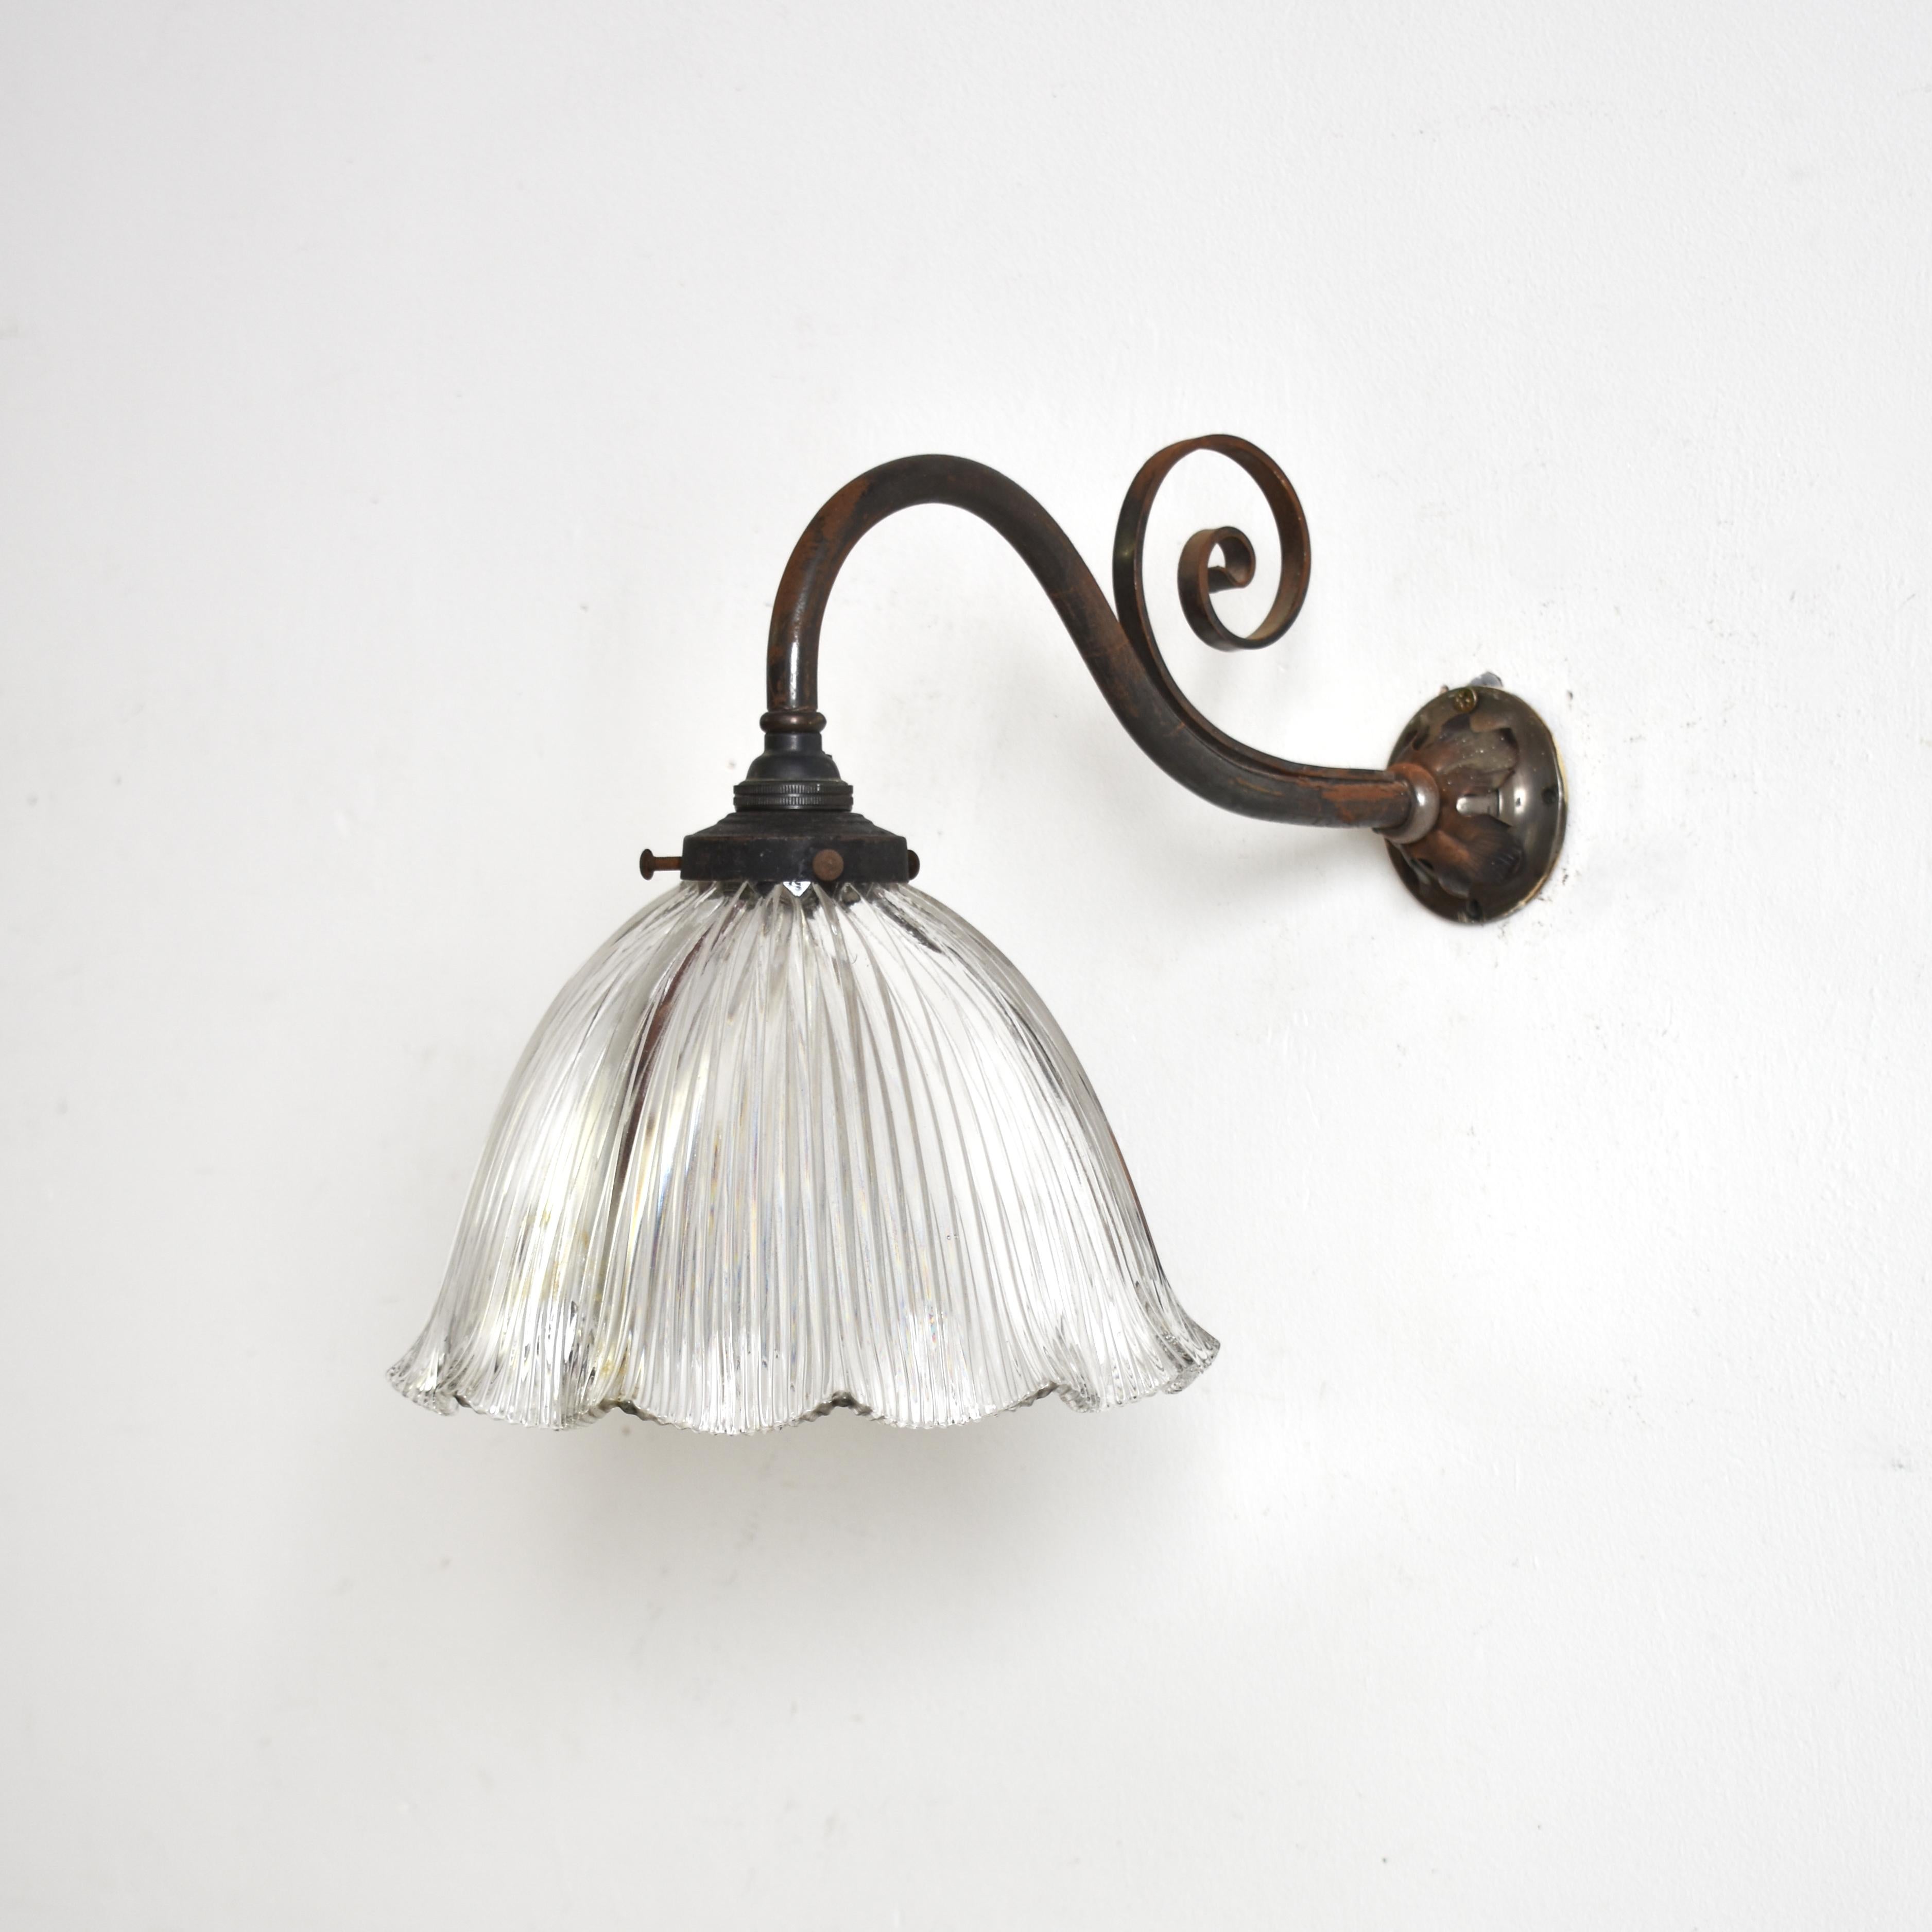 Antique Church Brass Wall Light By Holophane In Good Condition For Sale In Stockbridge, GB